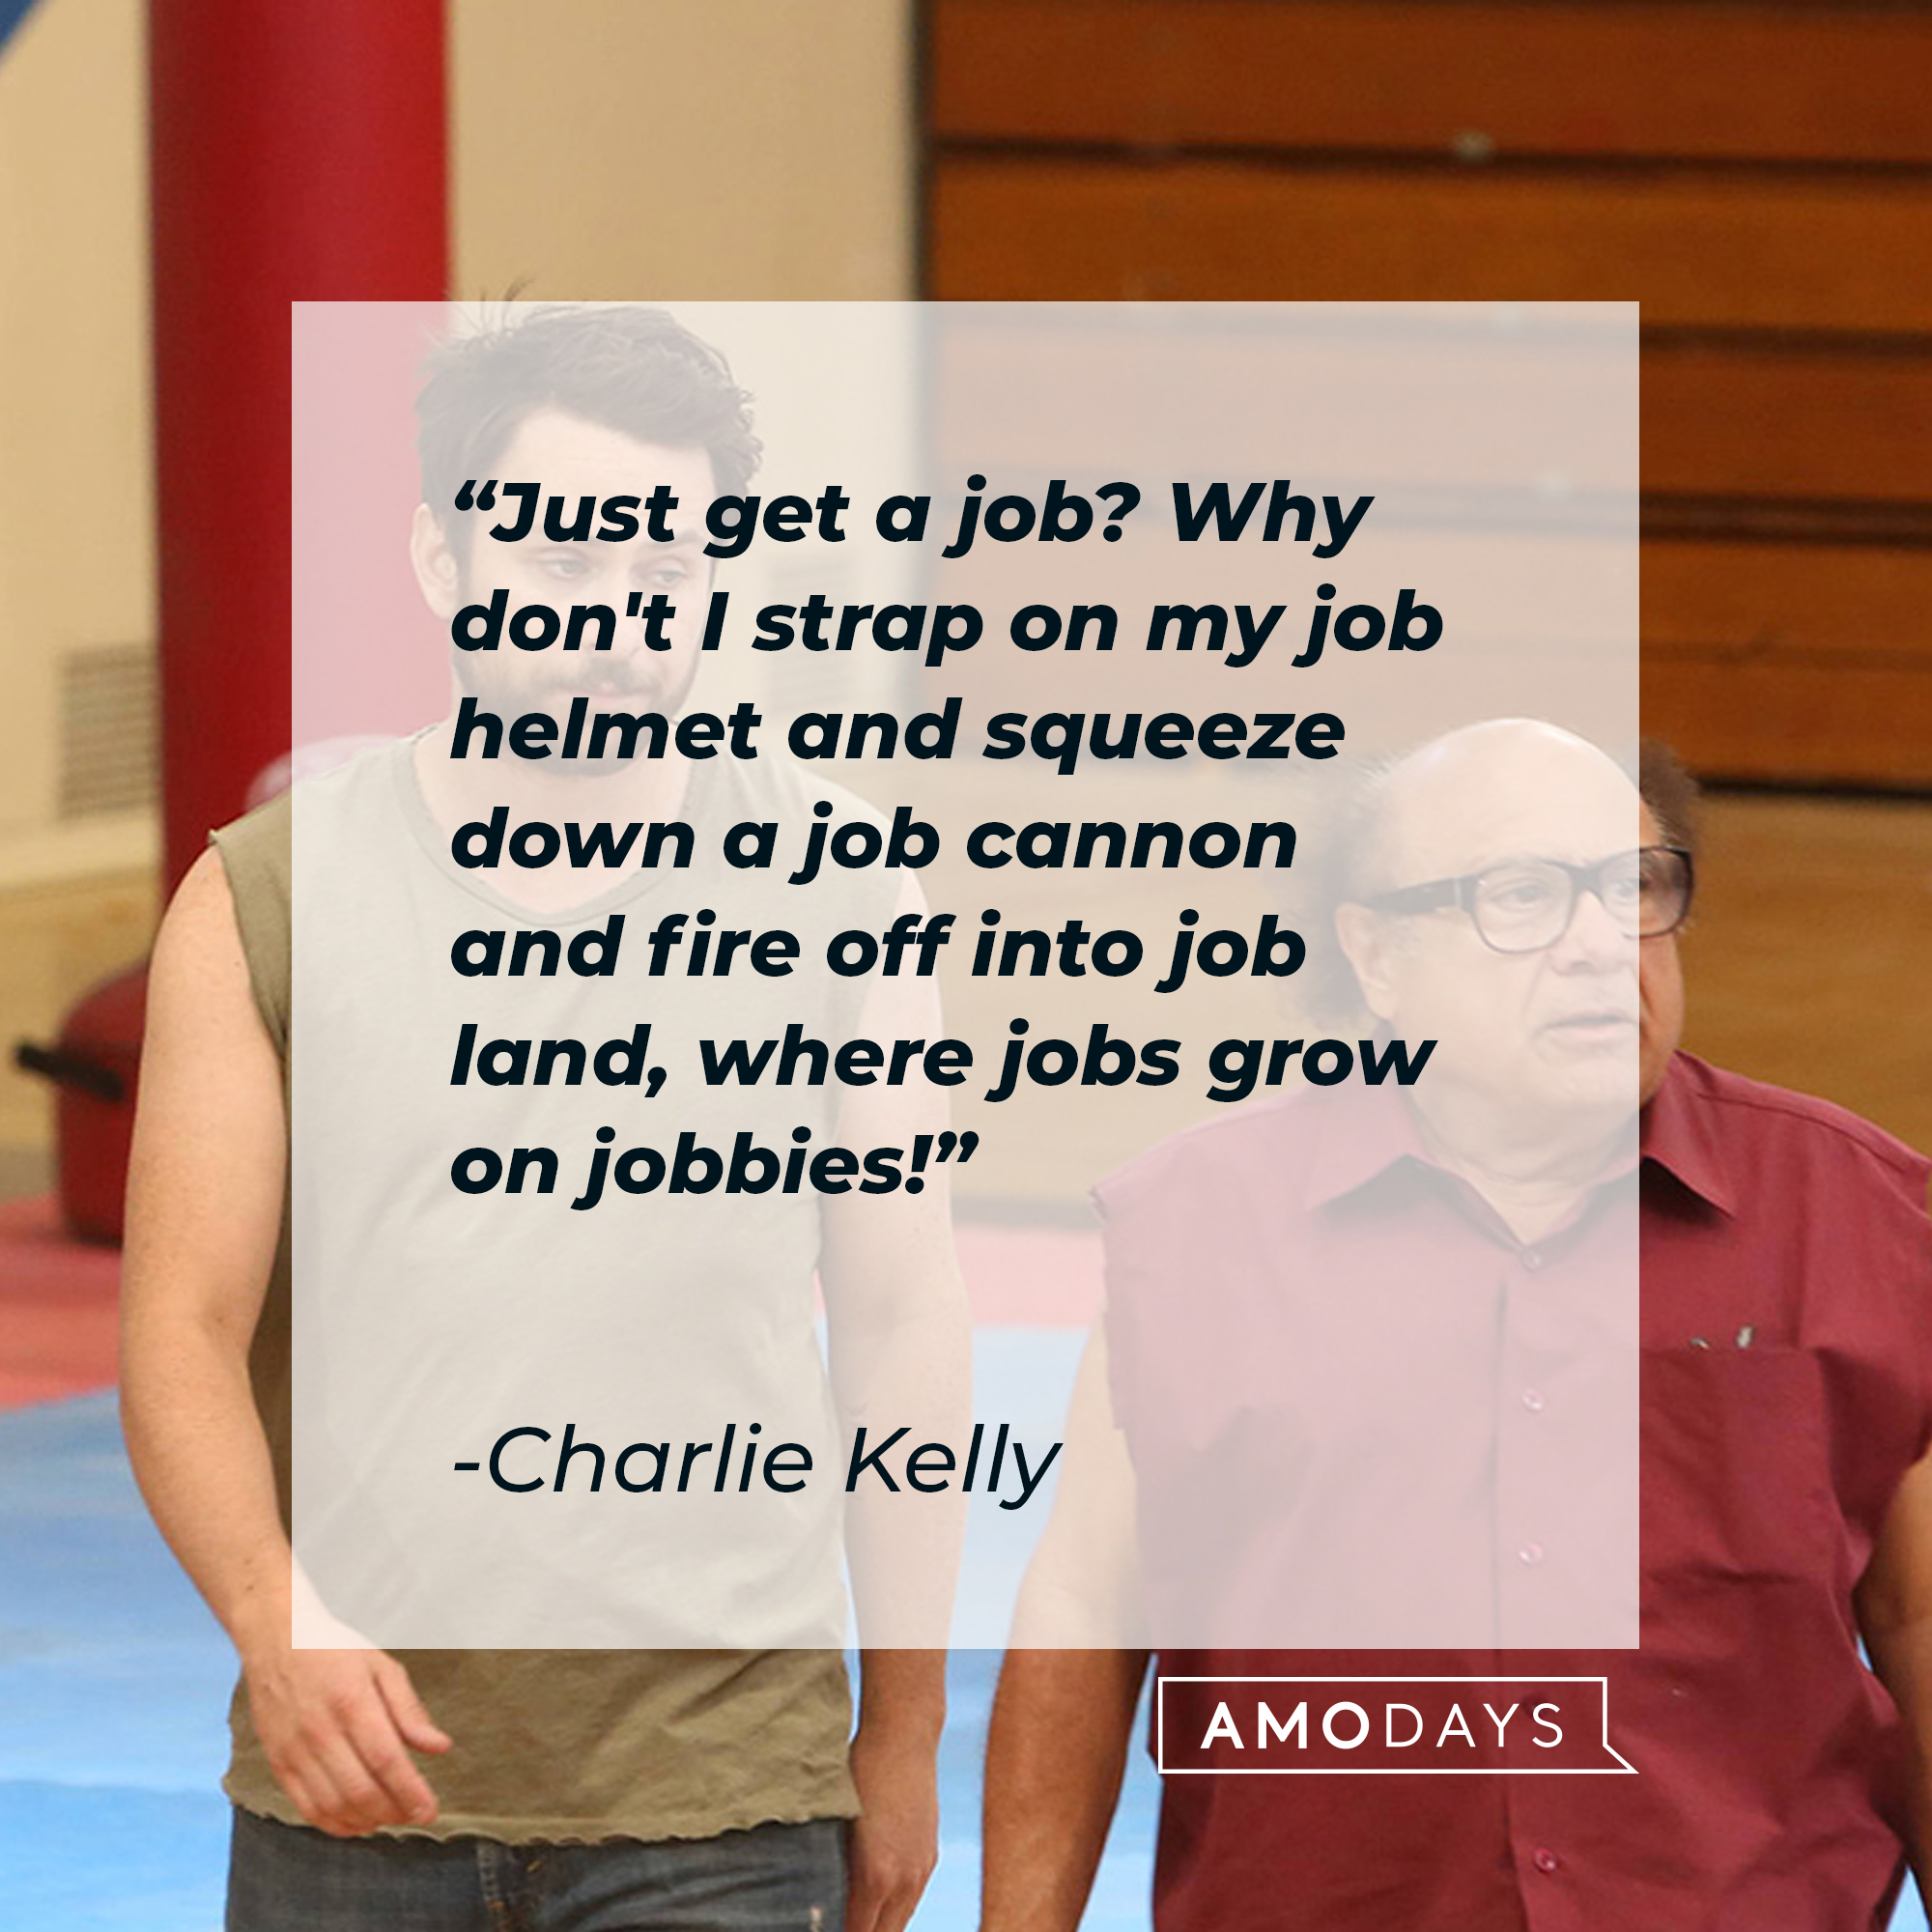 Charlie Kelly with his quote: "Just get a job? Why don't I strap on my job helmet and squeeze down a job cannon and fire off into job land, where jobs grow on jobbies!" | Source: Facebook/alwayssunny